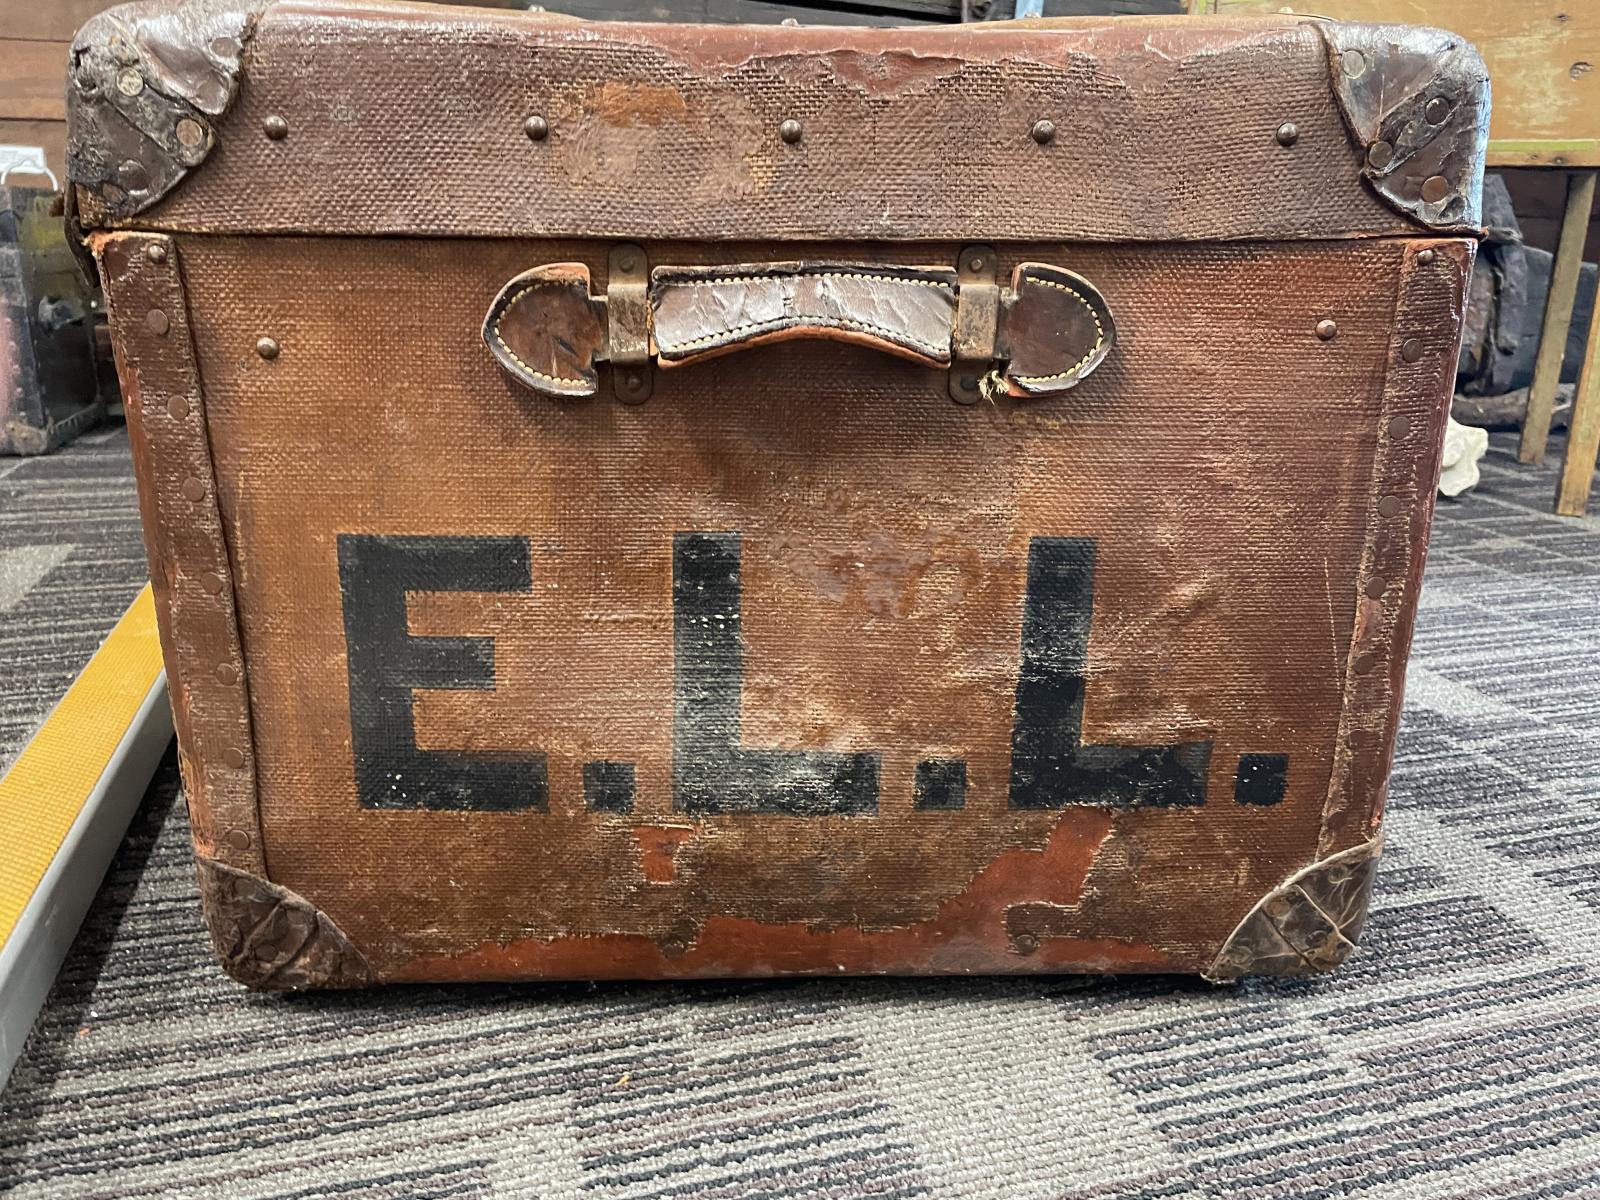 Handle at end of trunk and lettering E.L.L